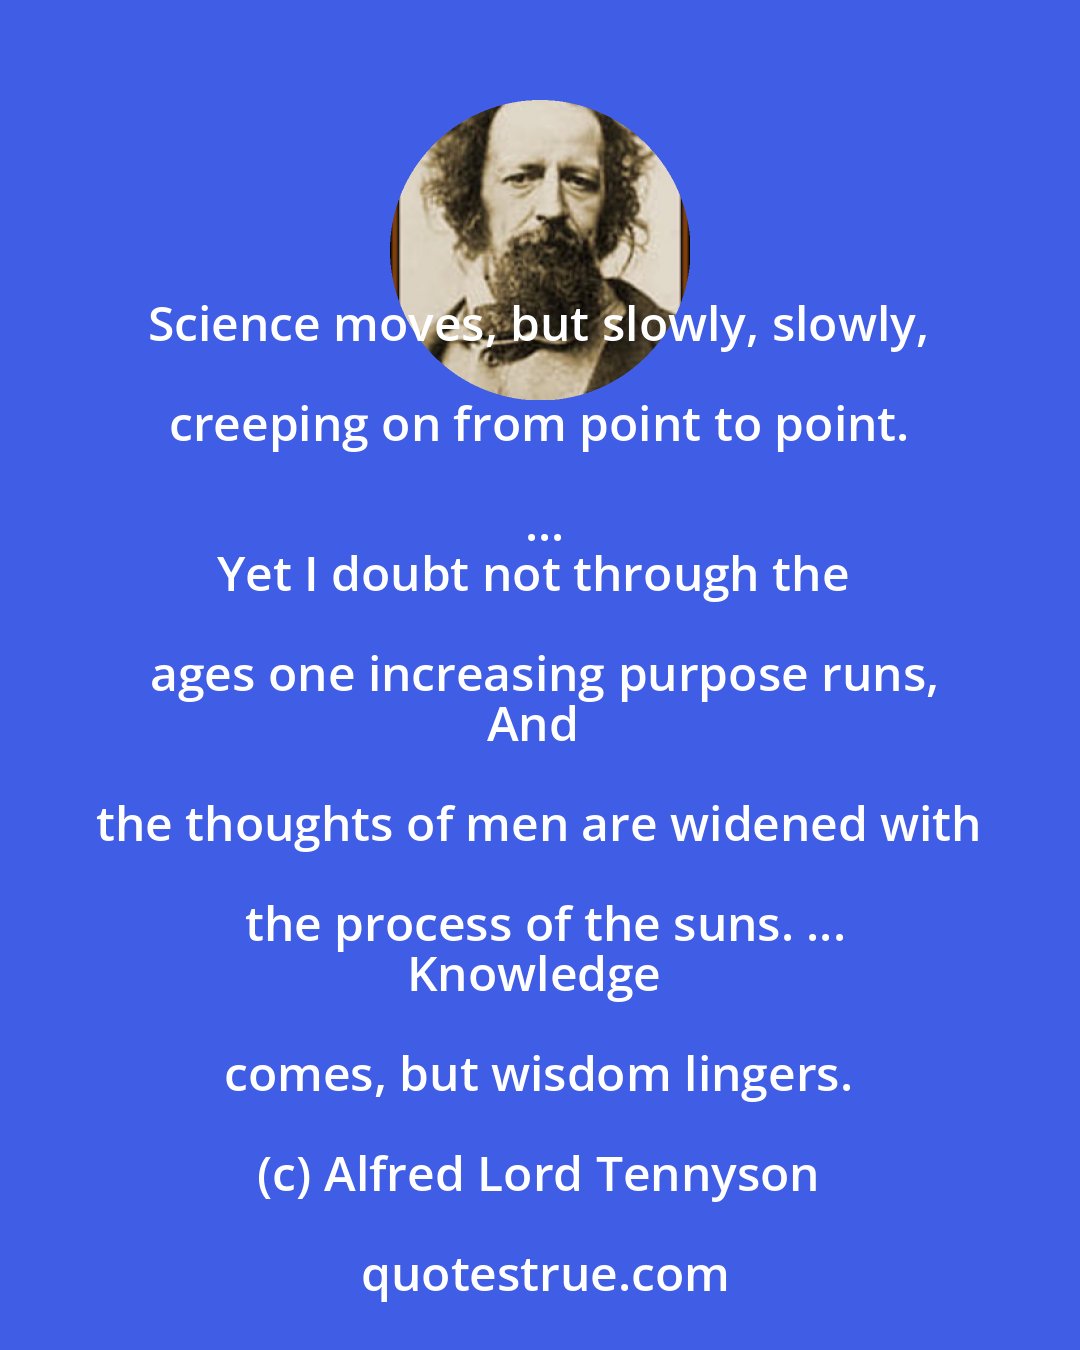 Alfred Lord Tennyson: Science moves, but slowly, slowly, creeping on from point to point. ...
Yet I doubt not through the ages one increasing purpose runs,
And the thoughts of men are widened with the process of the suns. ...
Knowledge comes, but wisdom lingers.